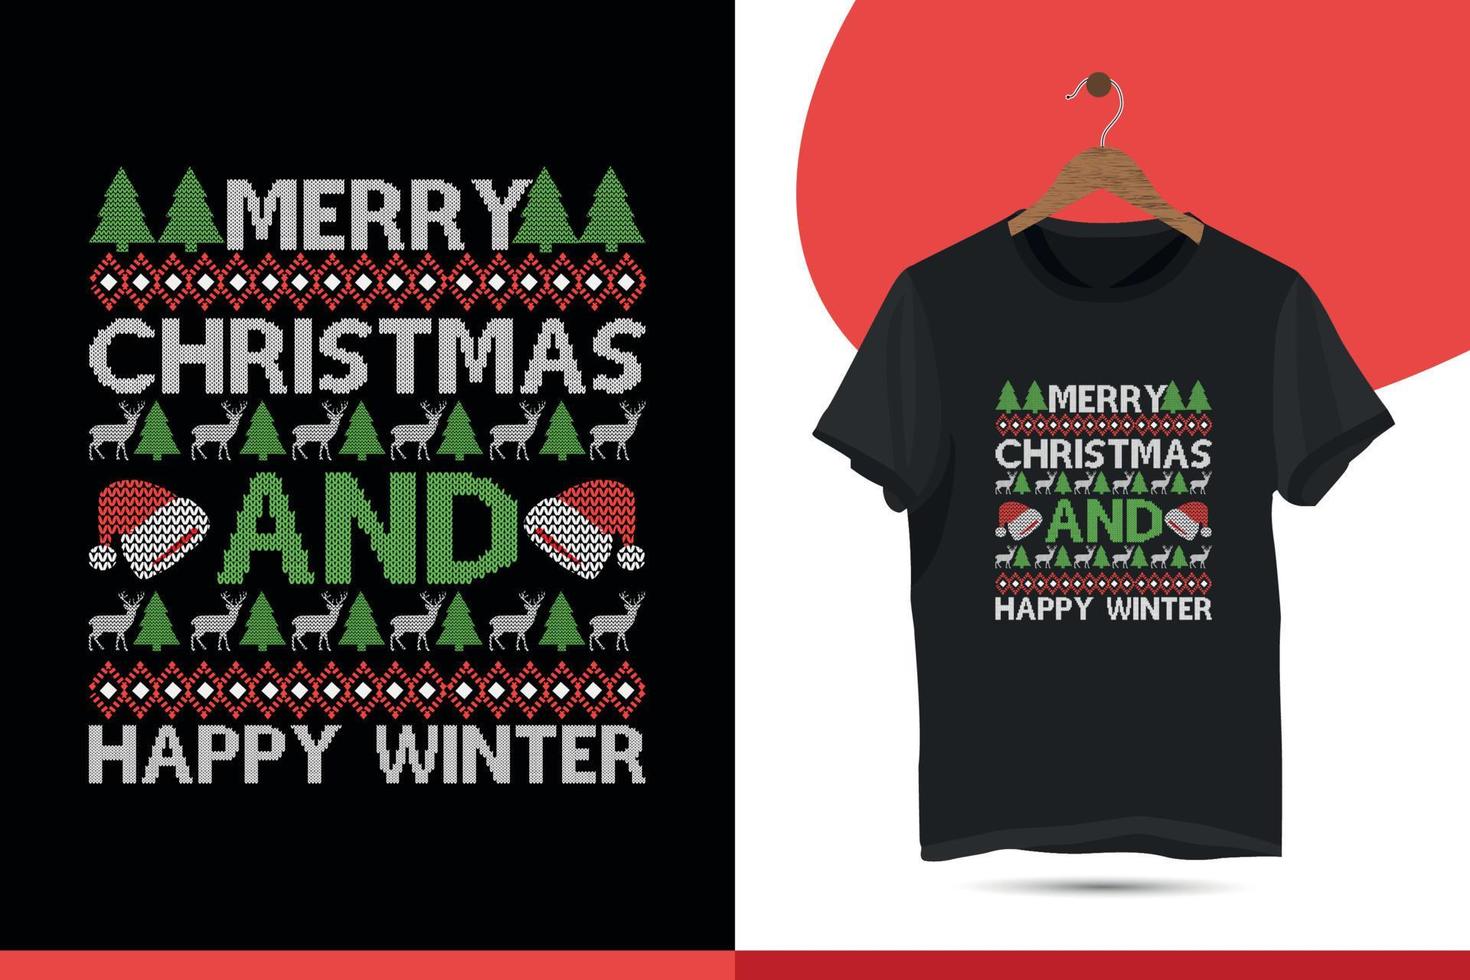 Merry Christmas and Happy Winter t-shirt designs for ugly sweater x mas party. Christmas merchandise designs. Christian religion quotes saying for print vector